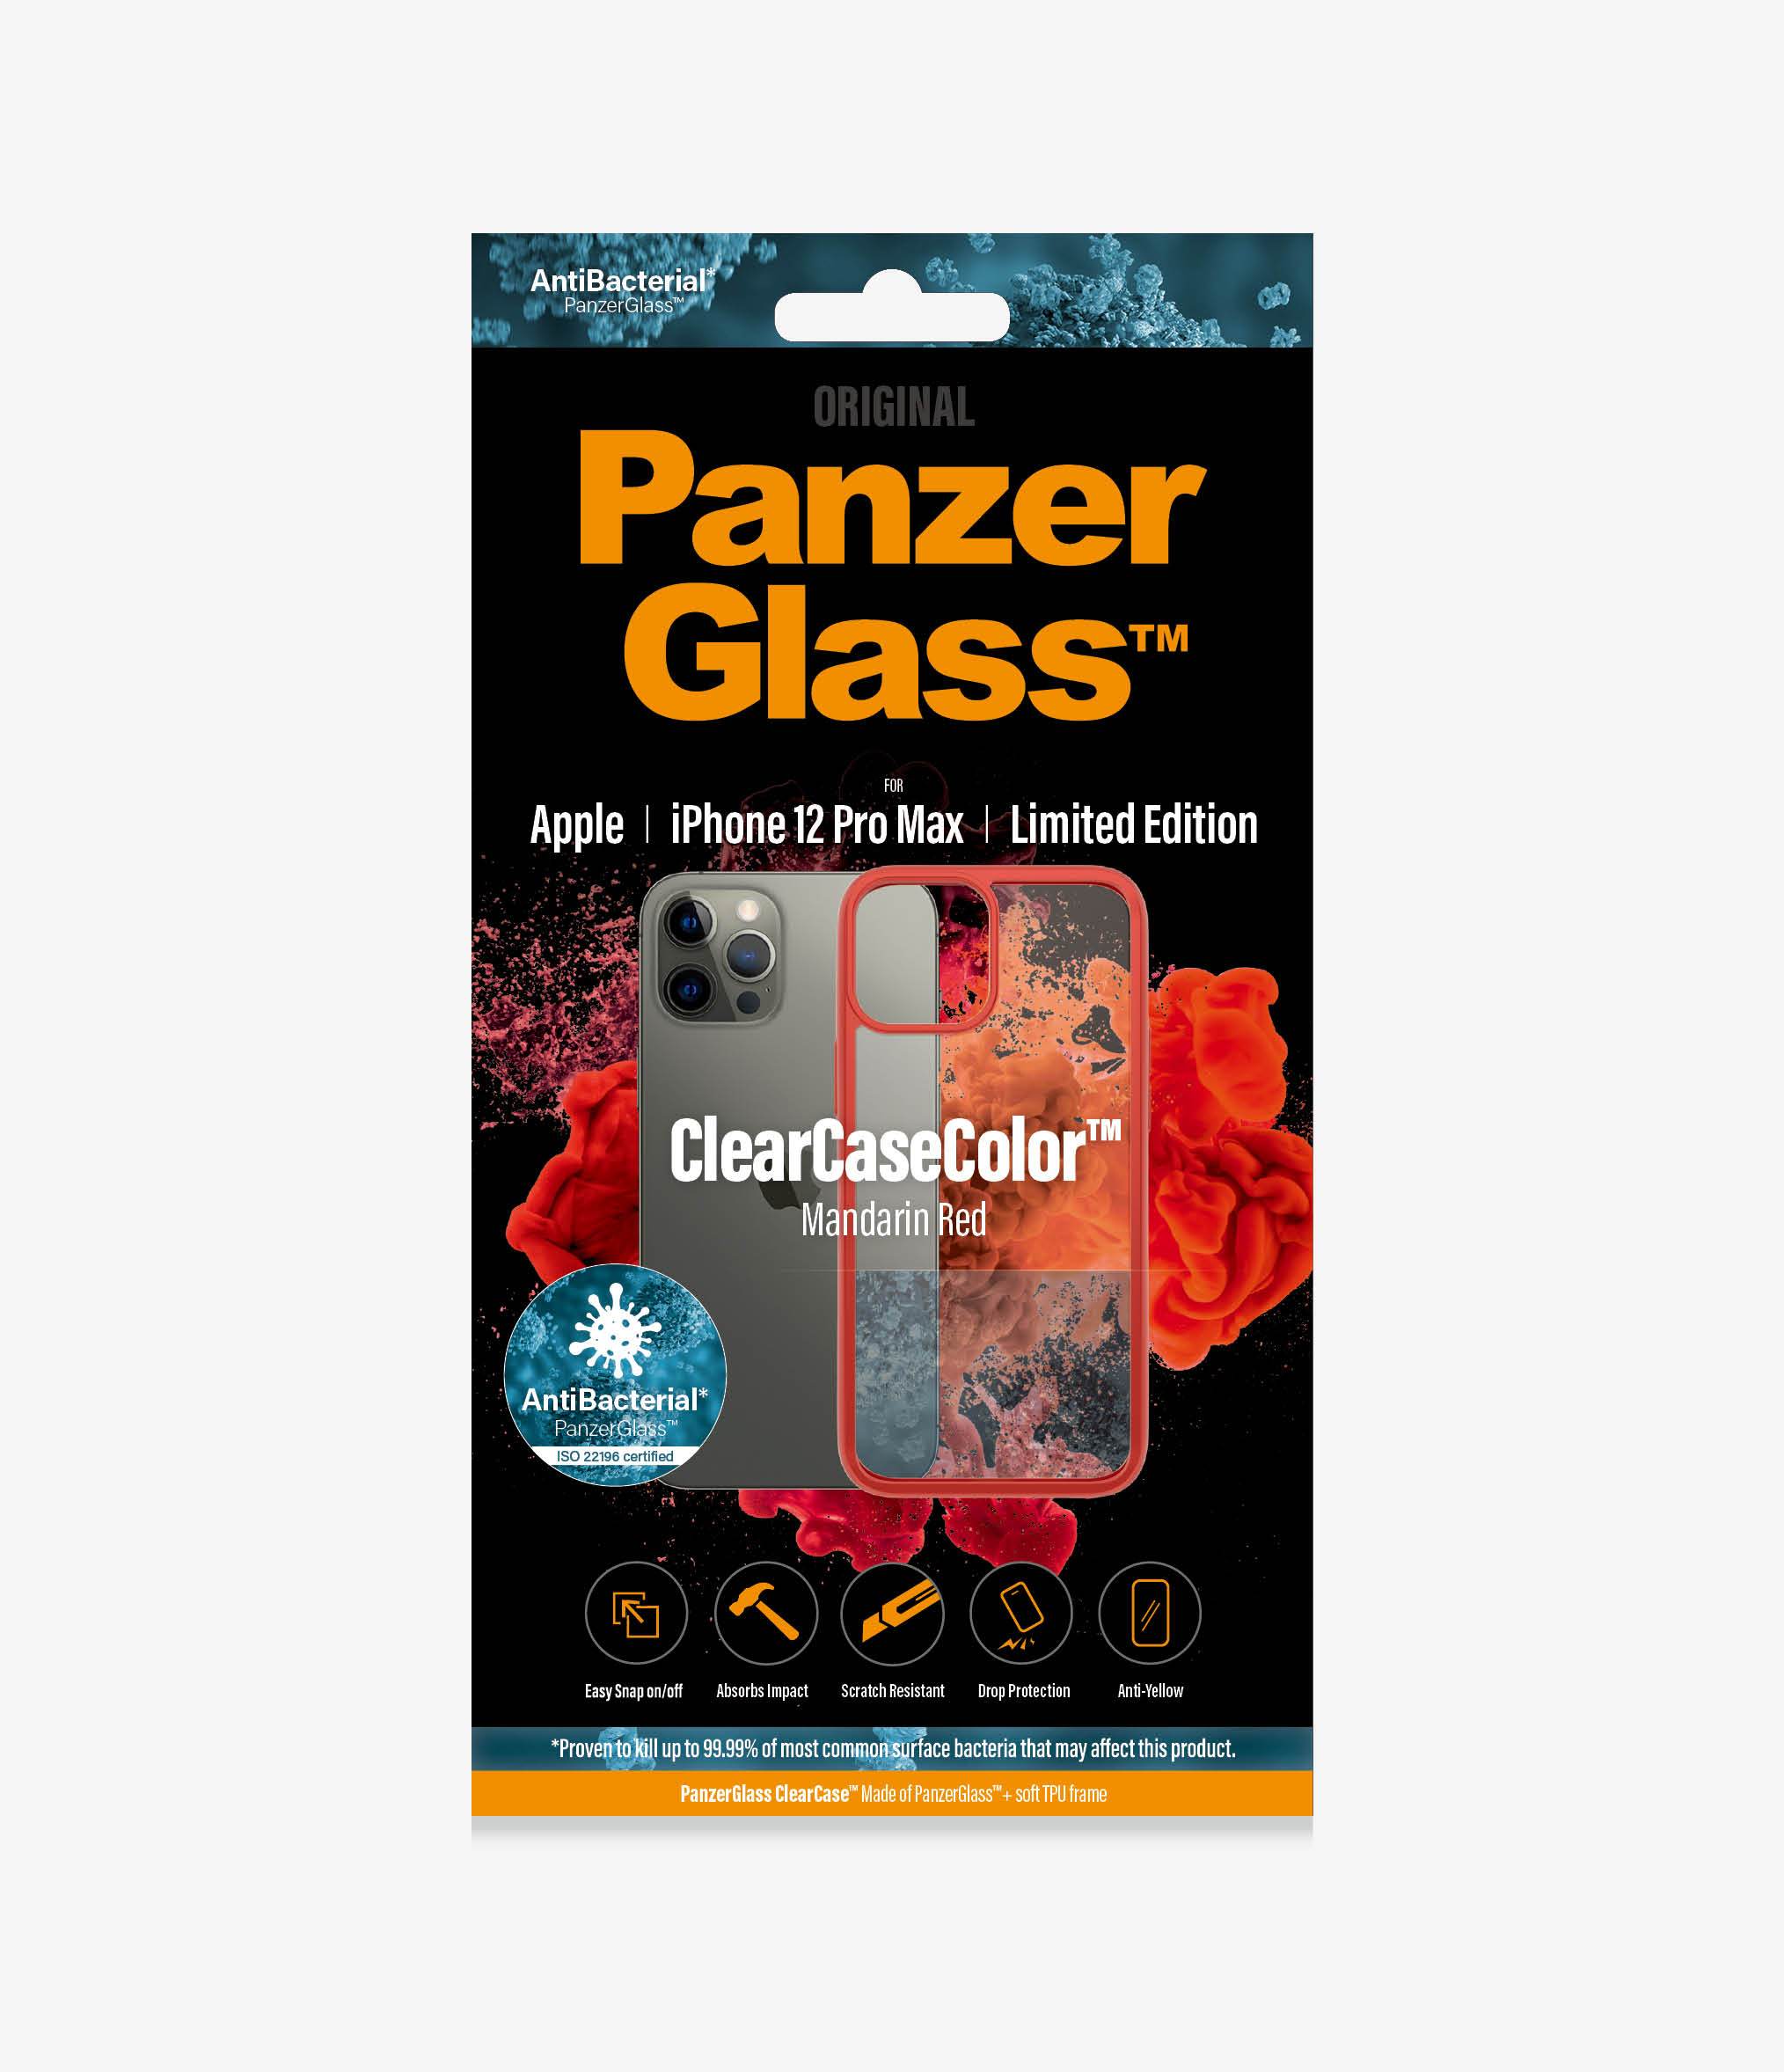 PanzerGlass™ ClearCaseColor™ Apple iPhone 12 Pro Max - Mandarin Red Limited Edition (0281), Slim fashionable design, Tempered anti-aging glass back